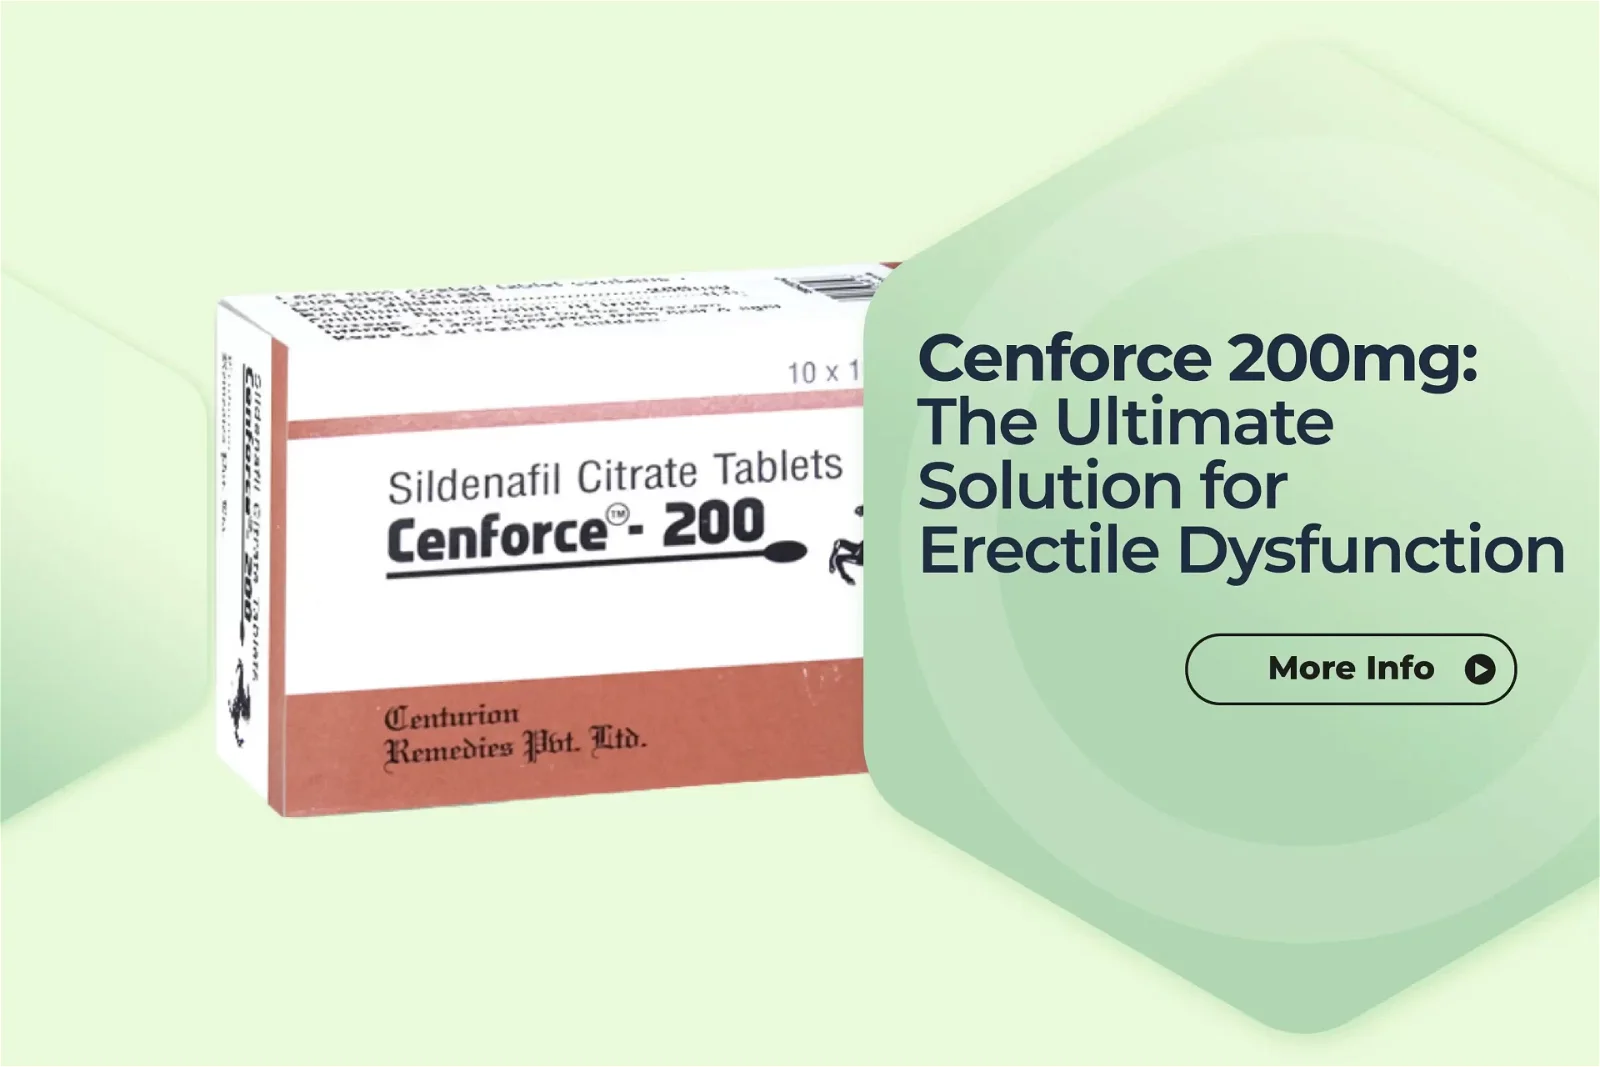 Cenforce 200mg The Ultimate Solution for Erectile Dysfunction